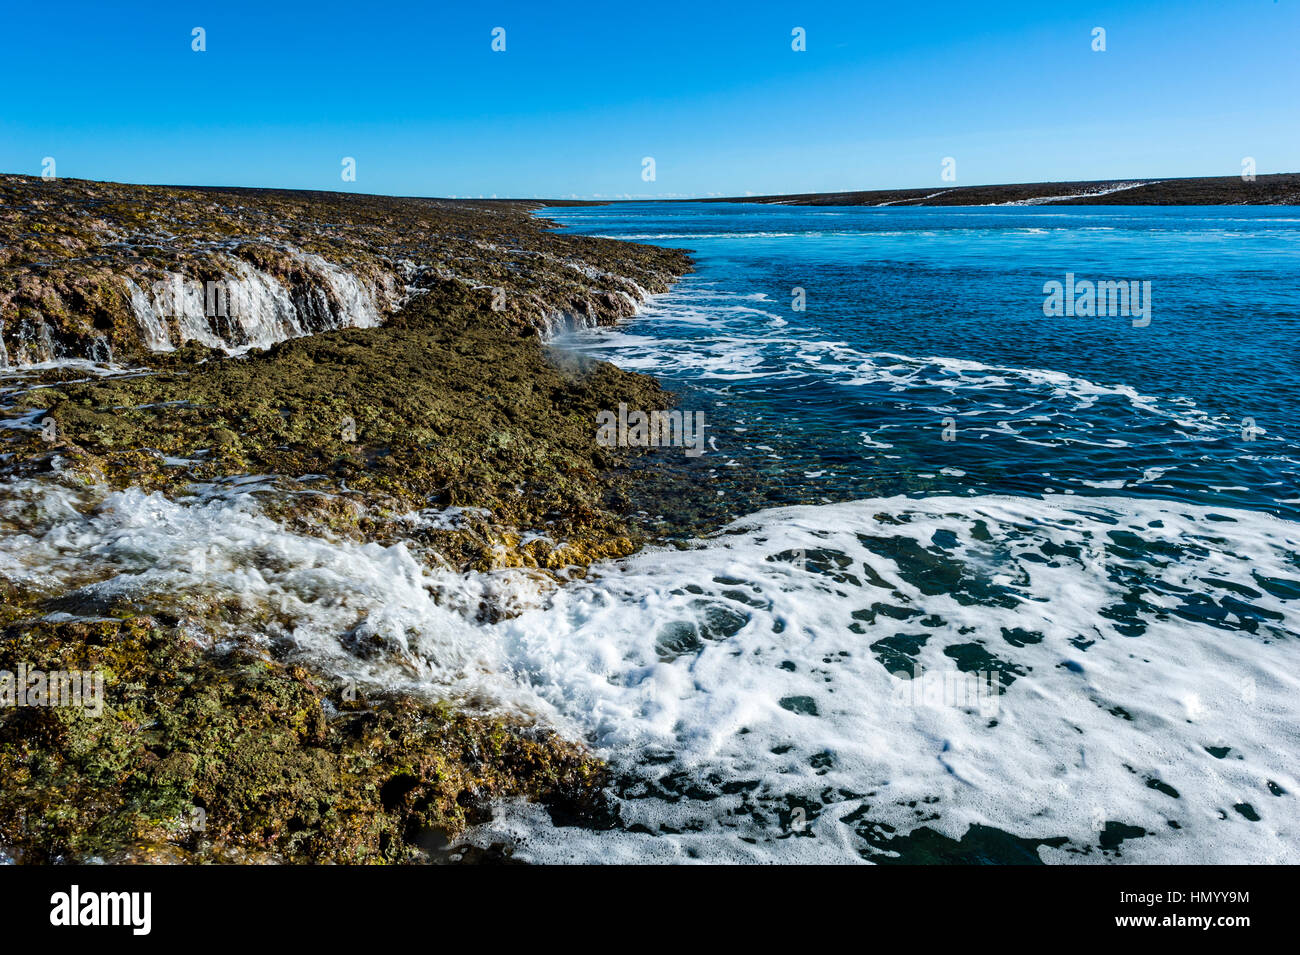 Water cascades from the surface of an exposed coral reef at low tide. Stock Photo